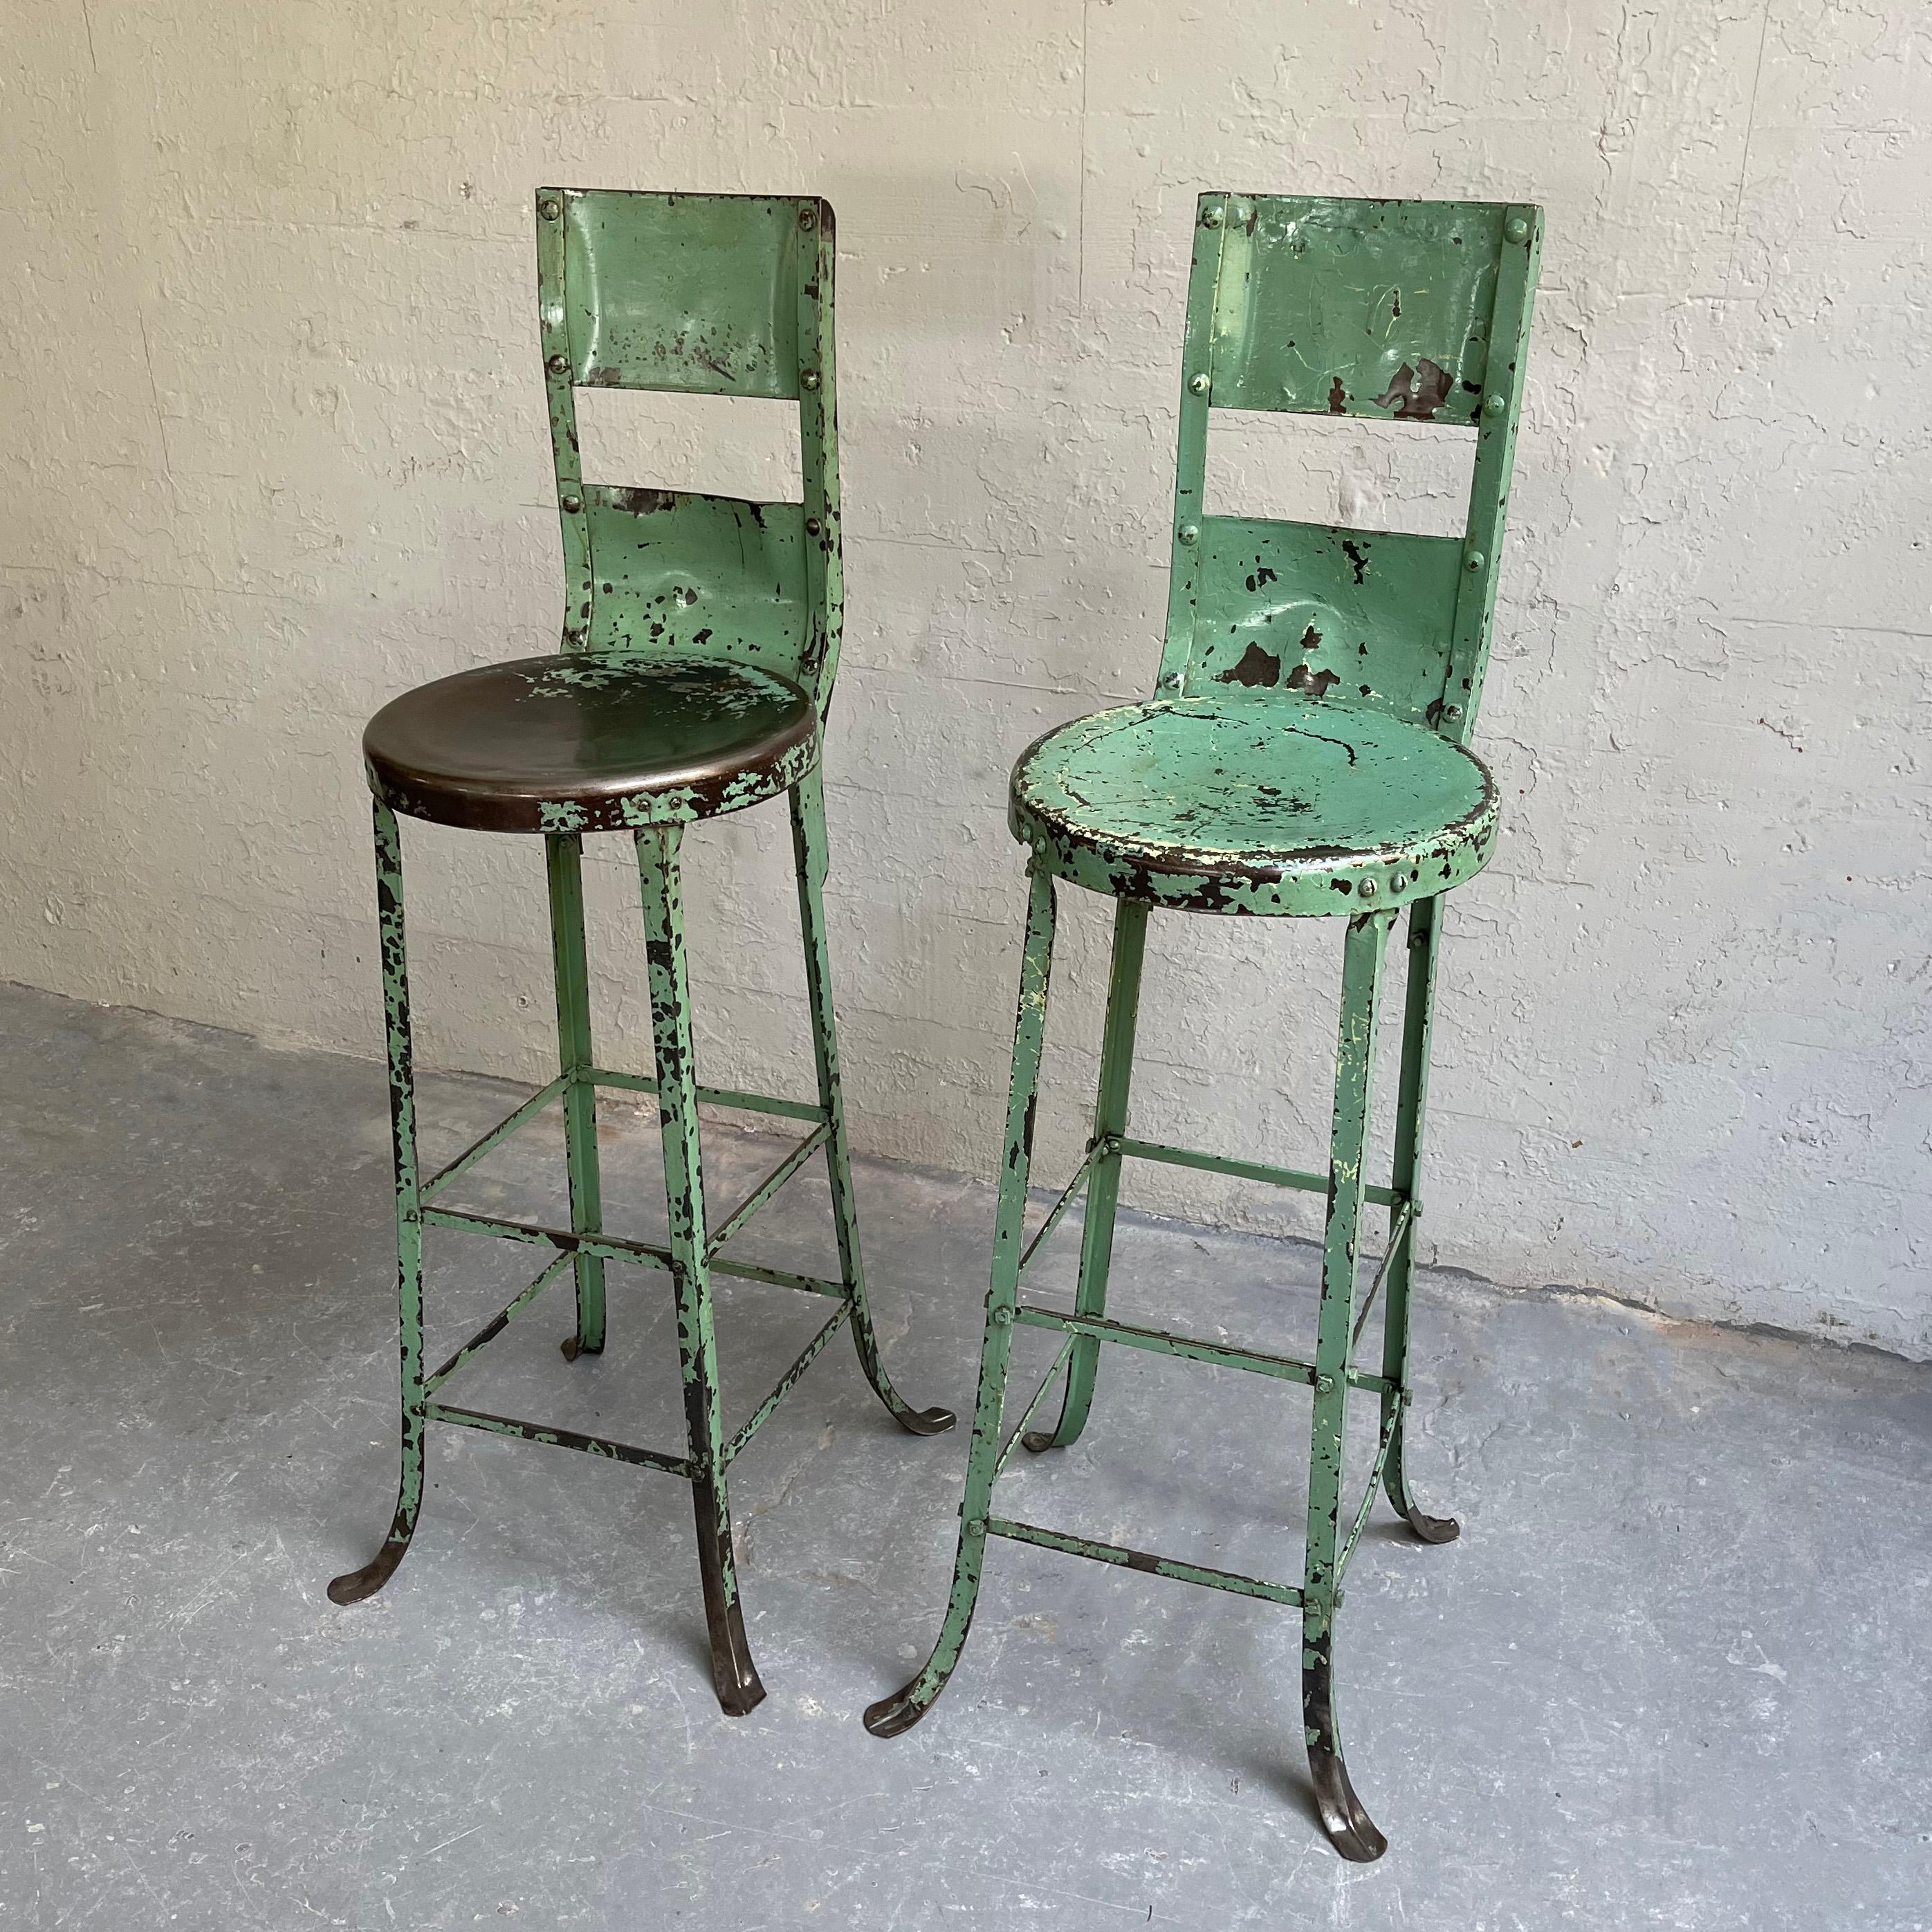 American Tall Industrial Painted Steel Shop Stools For Sale